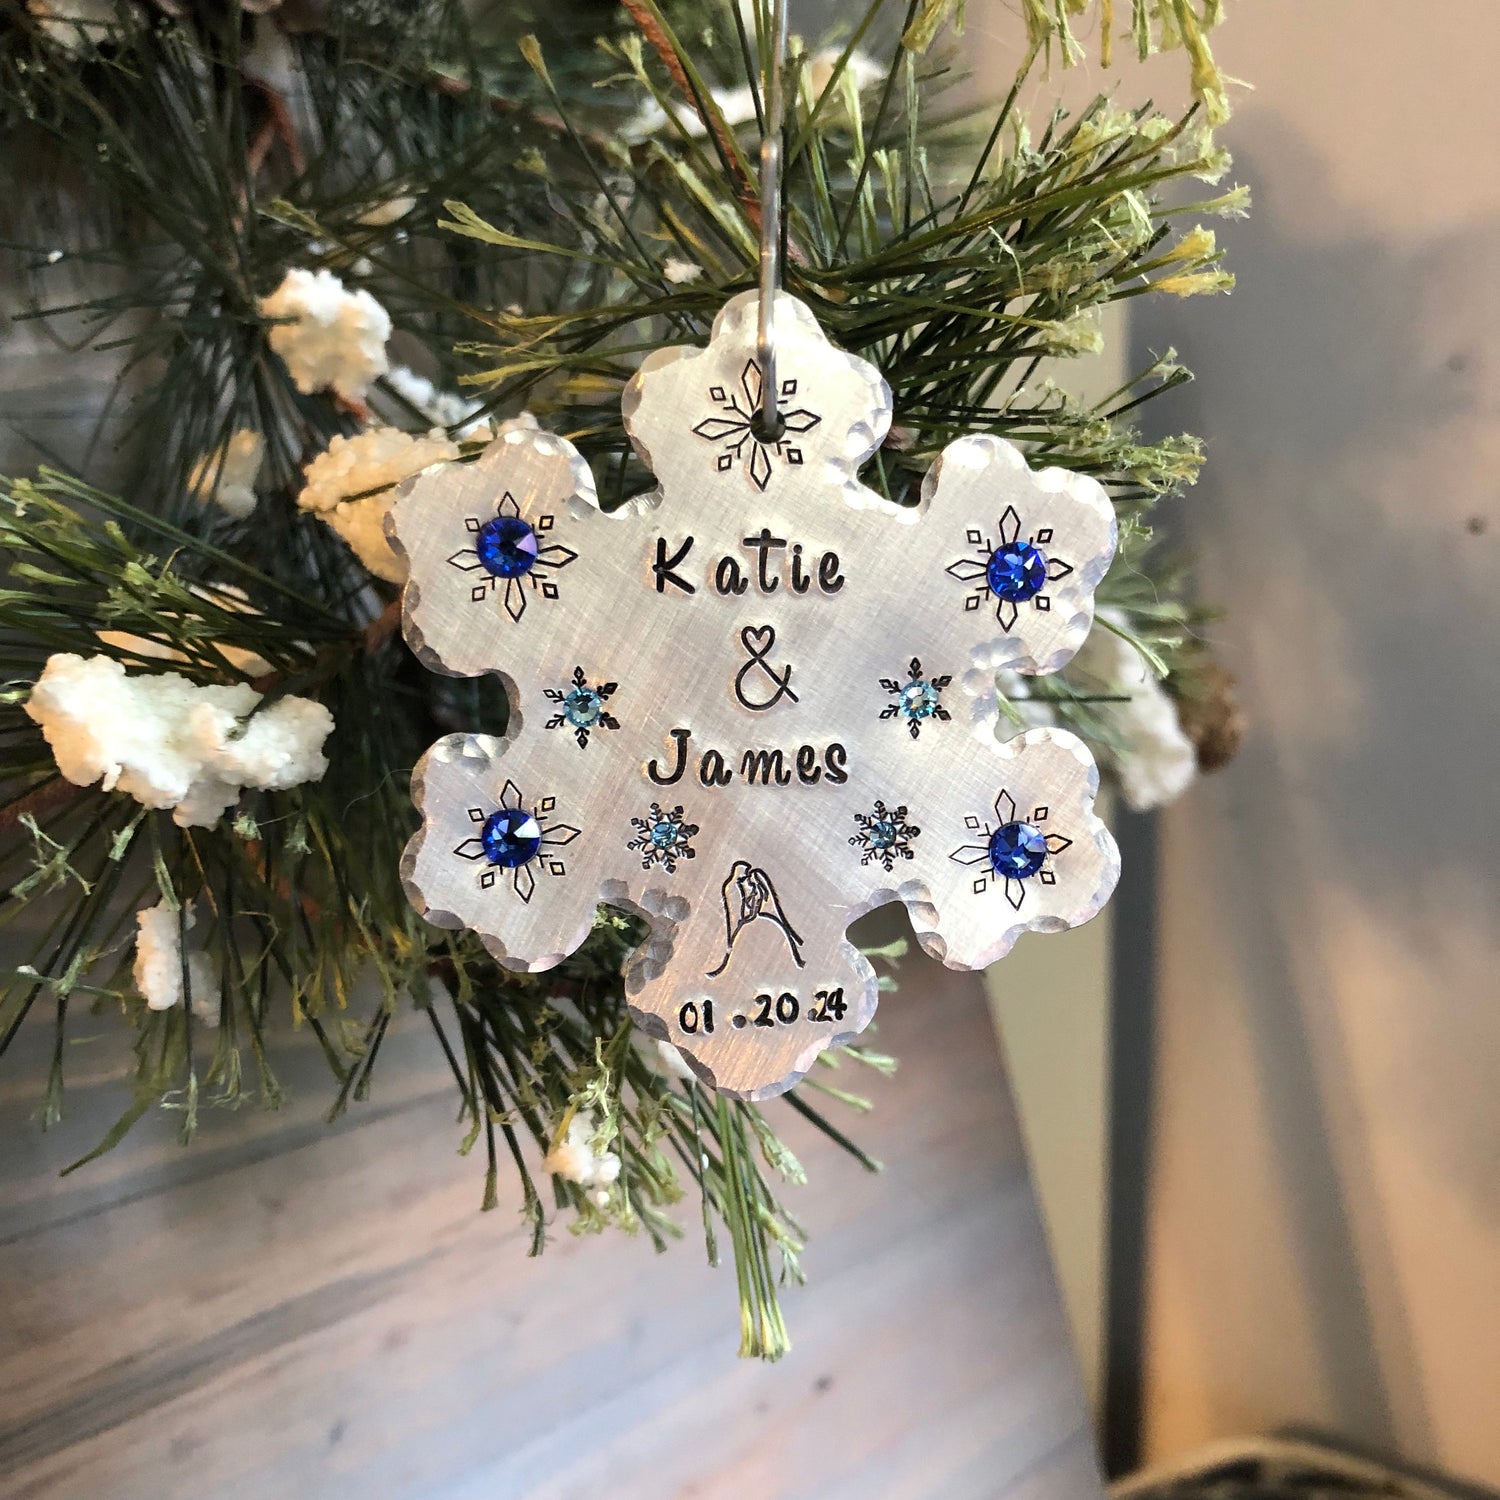 Something Blue for Winter Wedding, Personalized Bridal Bouquet Charm, Snowflake with Blue Crystals, Couple Names & Date, Christmas Ornament